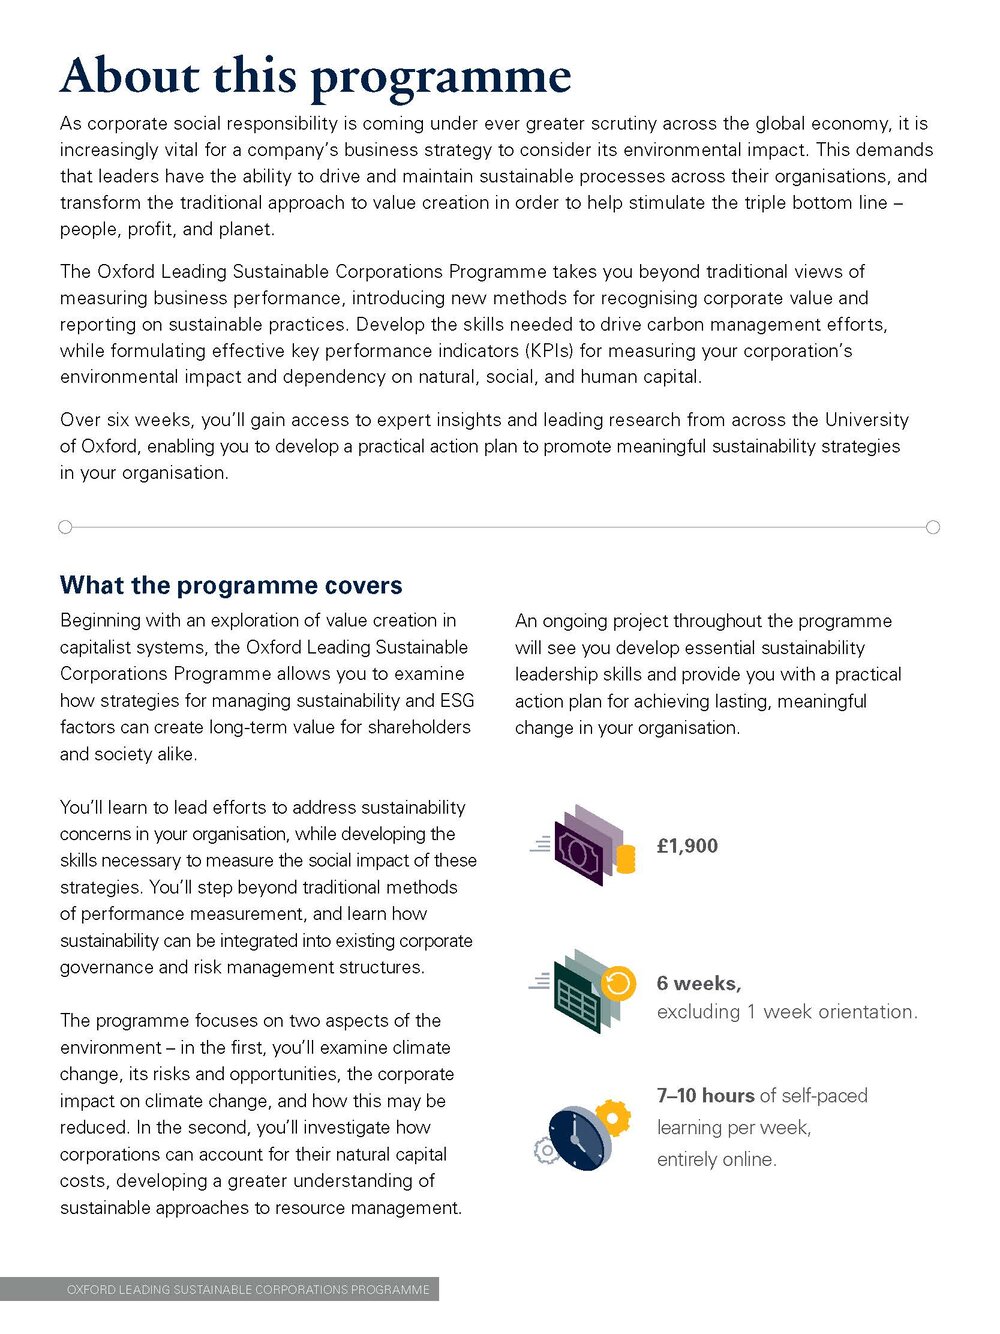 oxford-leading-sustainable-corporations-programme-prospectus_Page_02.jpg